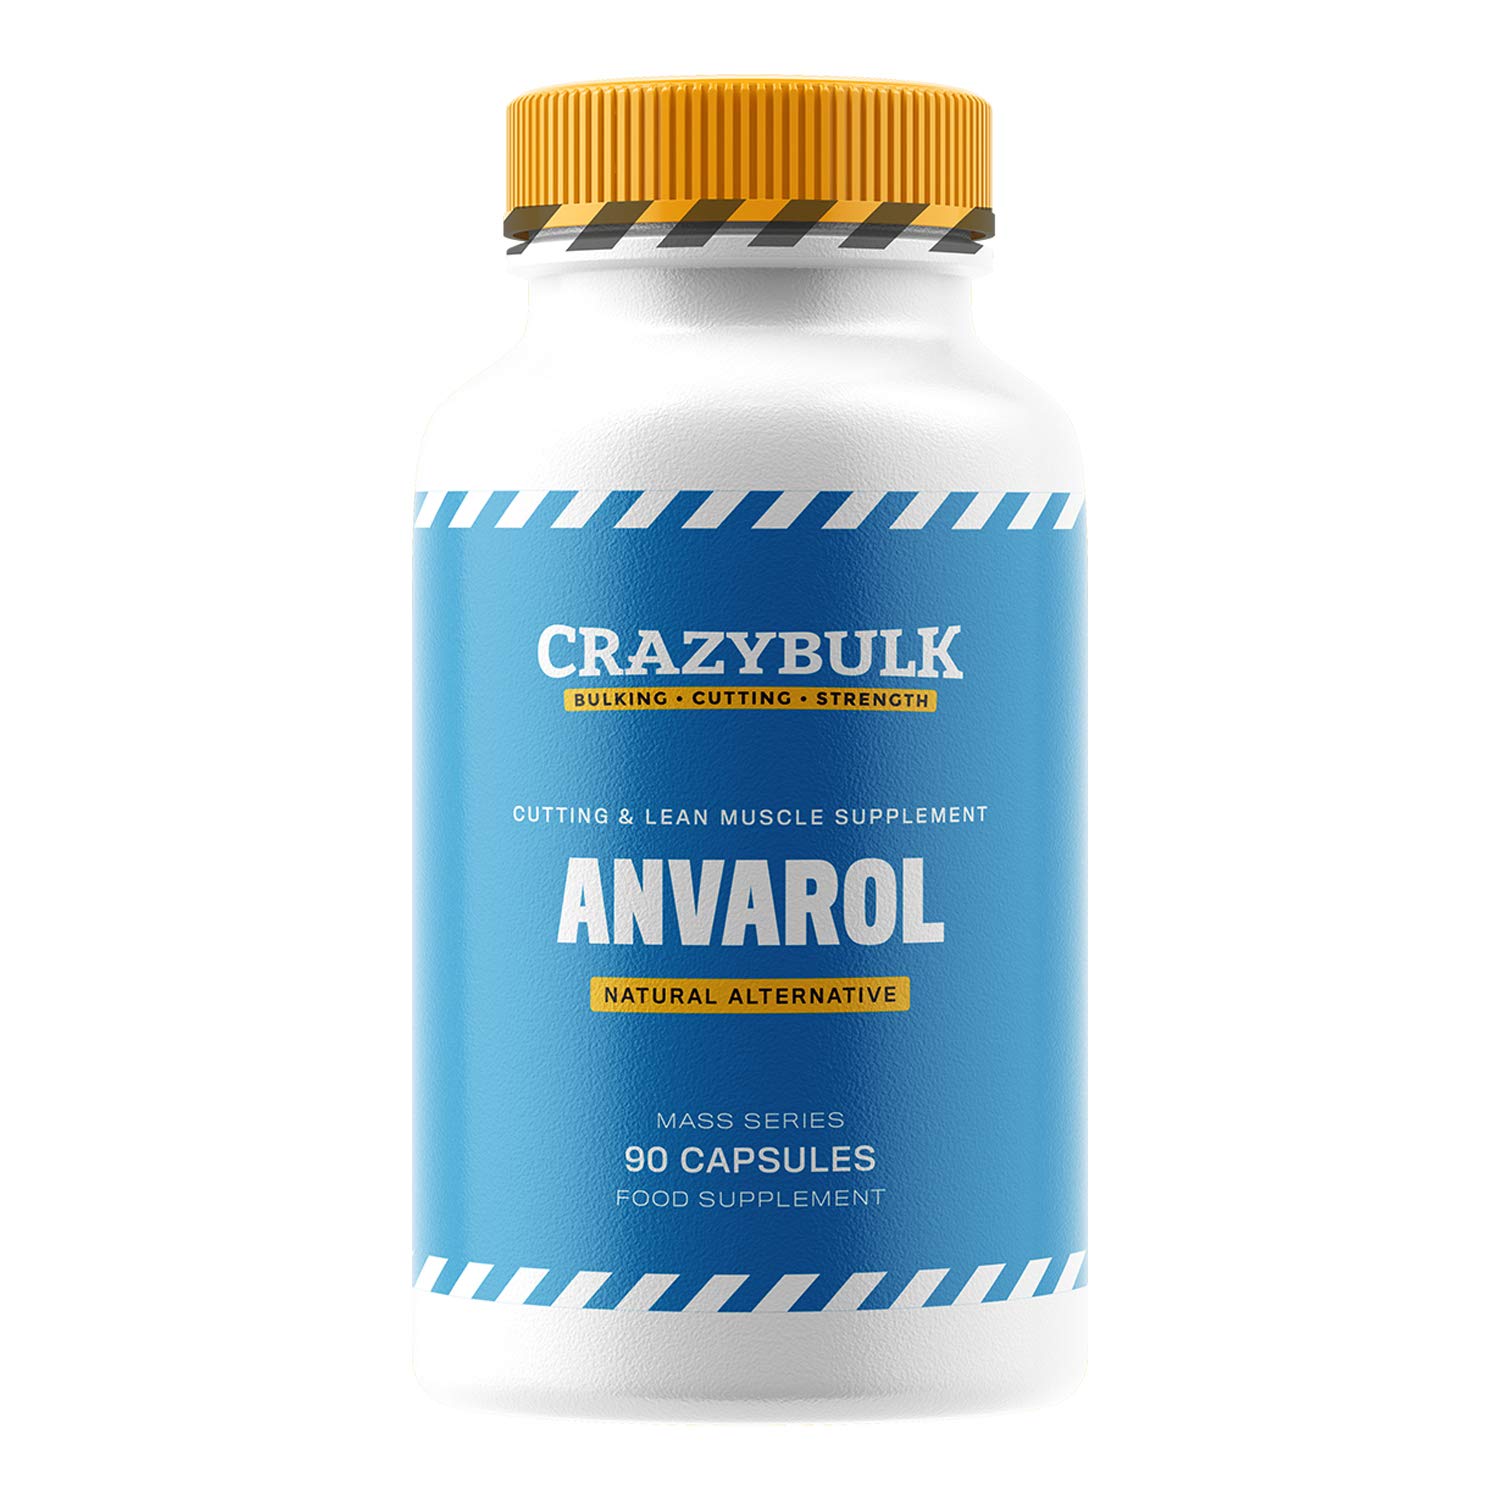 avarol - Does Anavar Increase Weight? Exploring the Facts and Risks